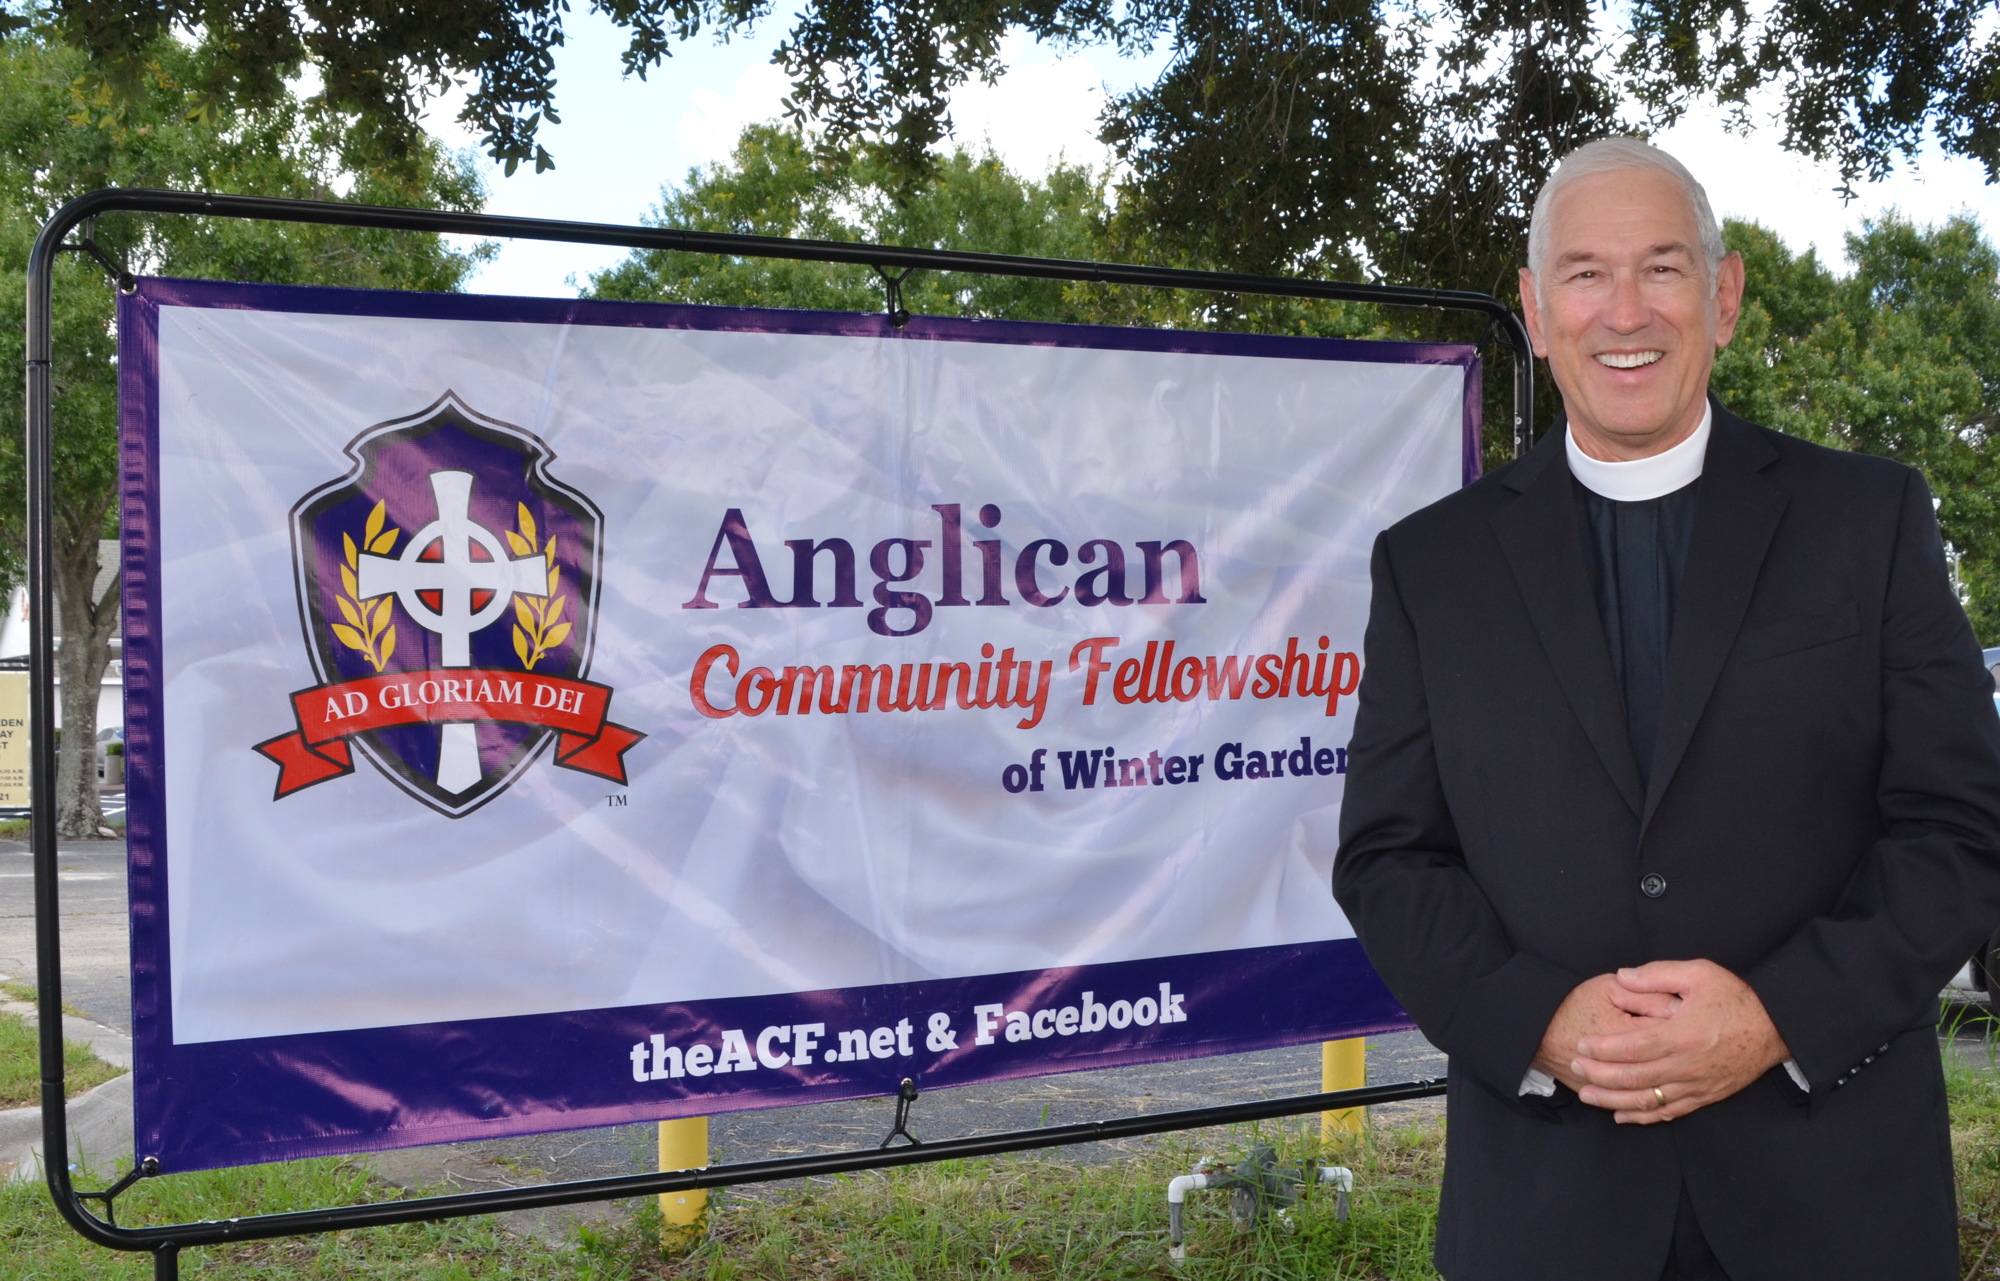 The Rev. Canon Tim Trombitas is a priest with Anglican Community Fellowship, a new church in Winter Garden.